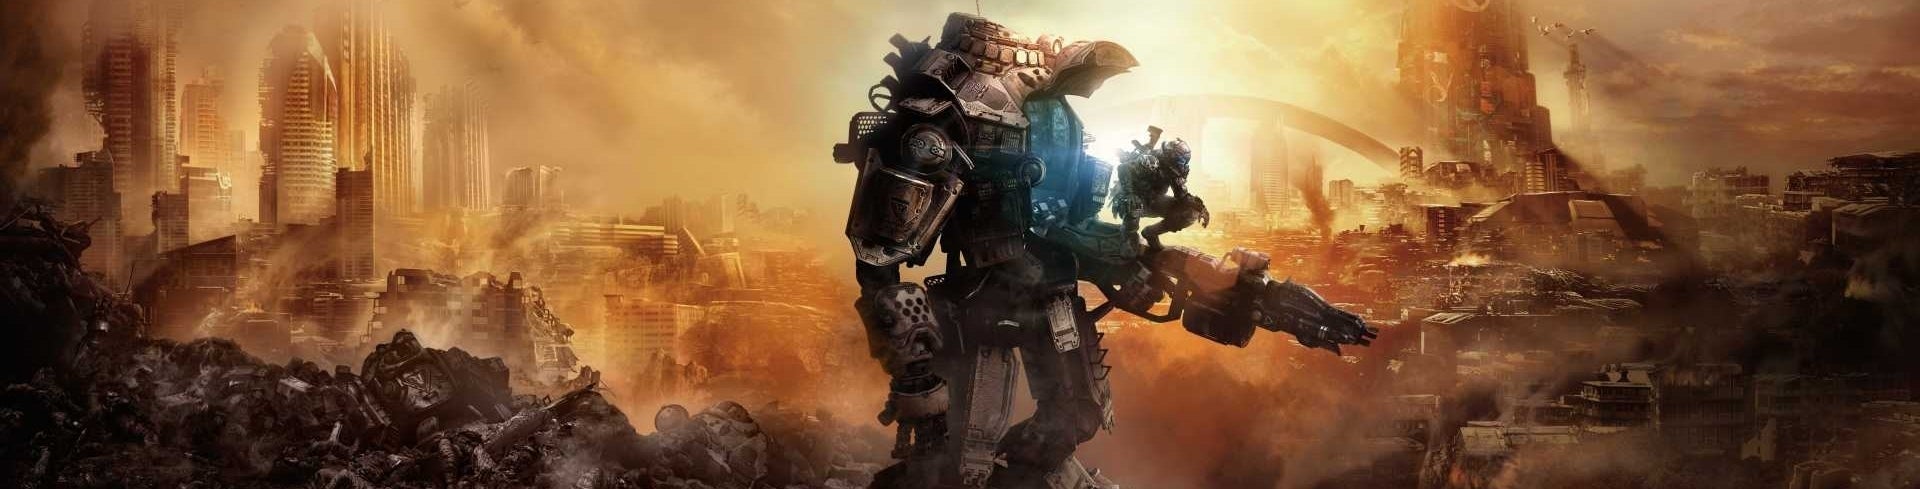 Image for Titanfall review